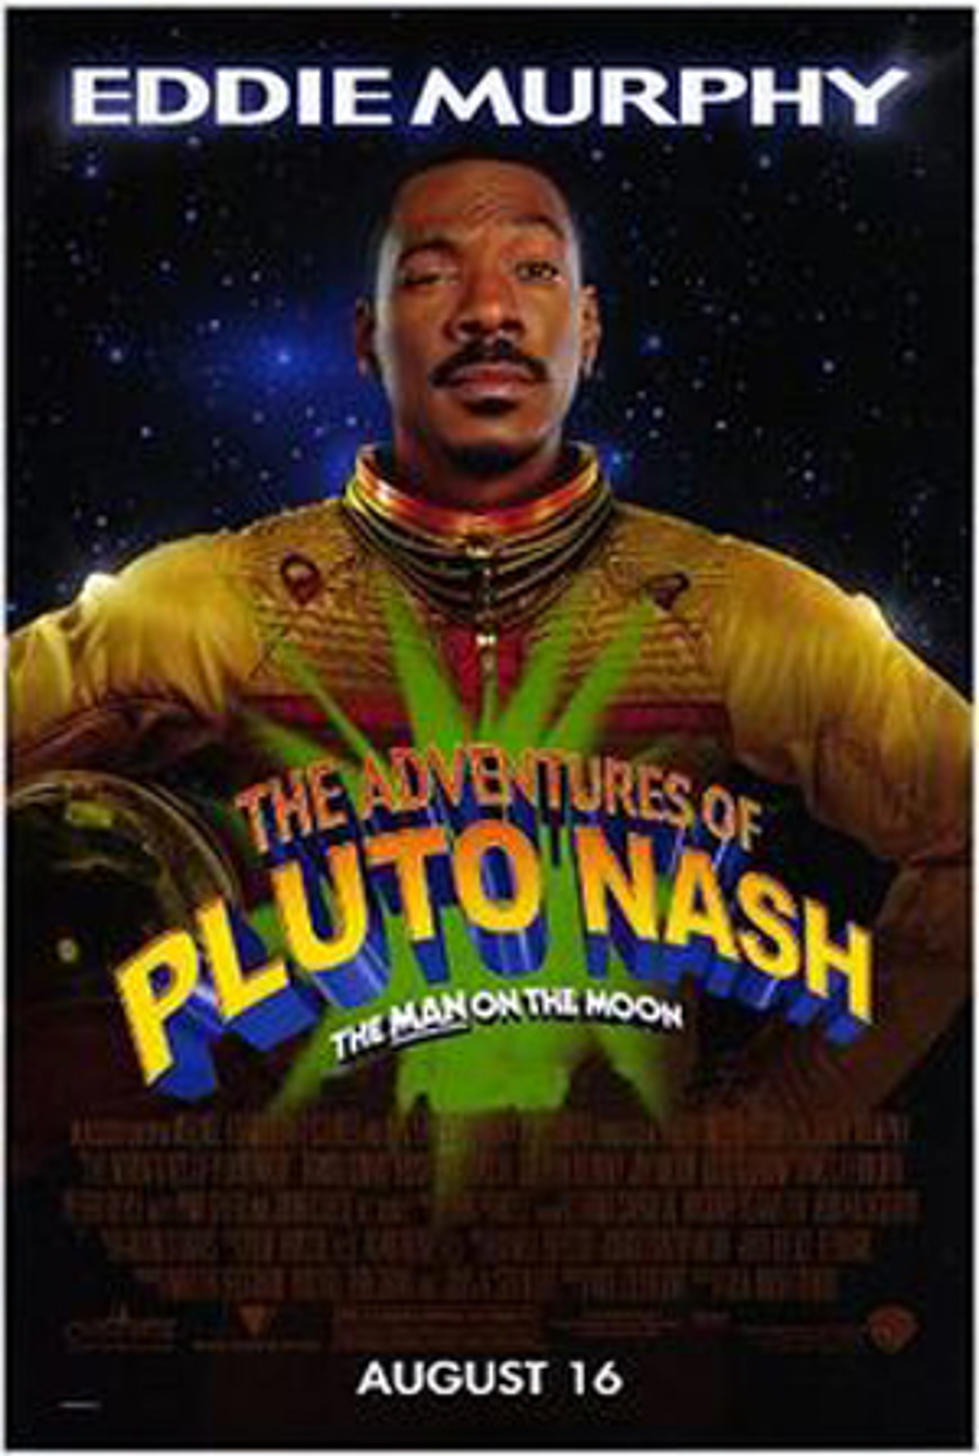 9. &#8216;The Adventures of Pluto Nash&#8217; &#8212; Biggest Movie Flops of All Time